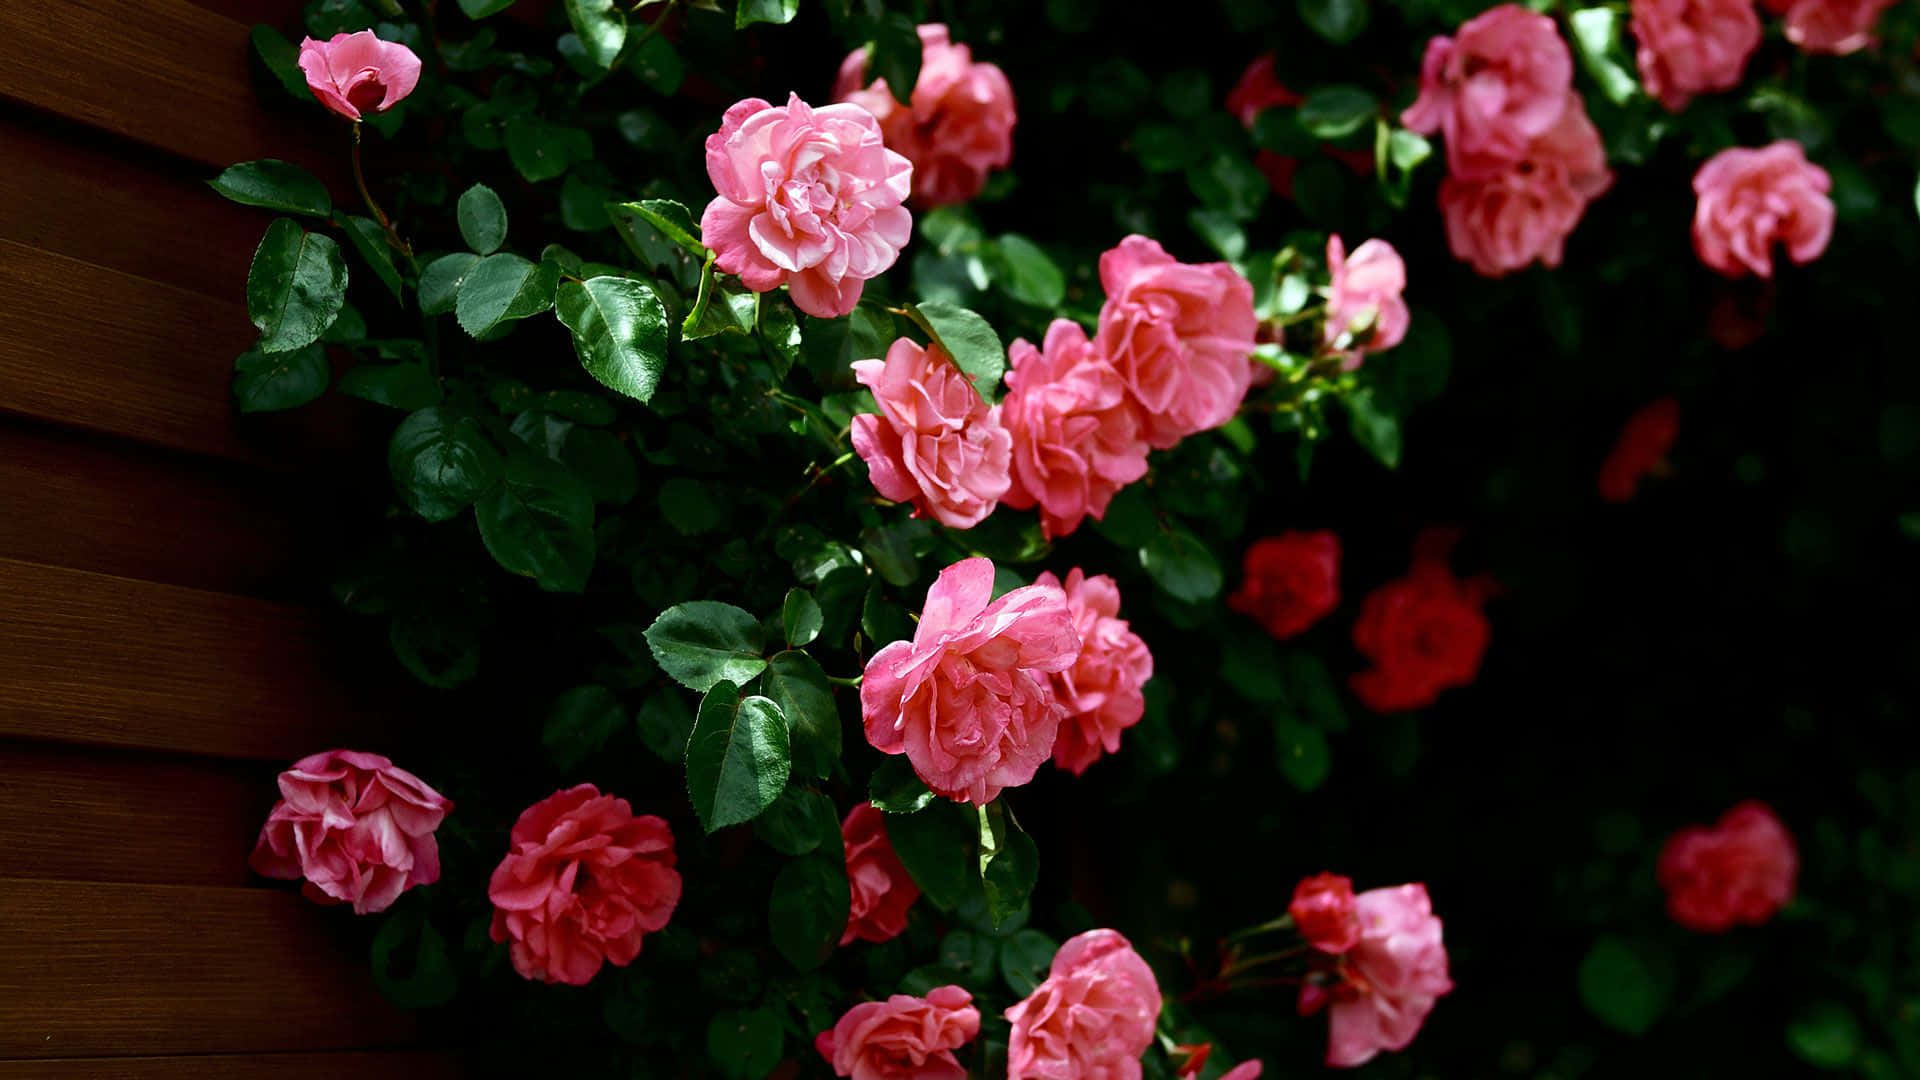 Pink Roses Growing On A Wall Wallpaper